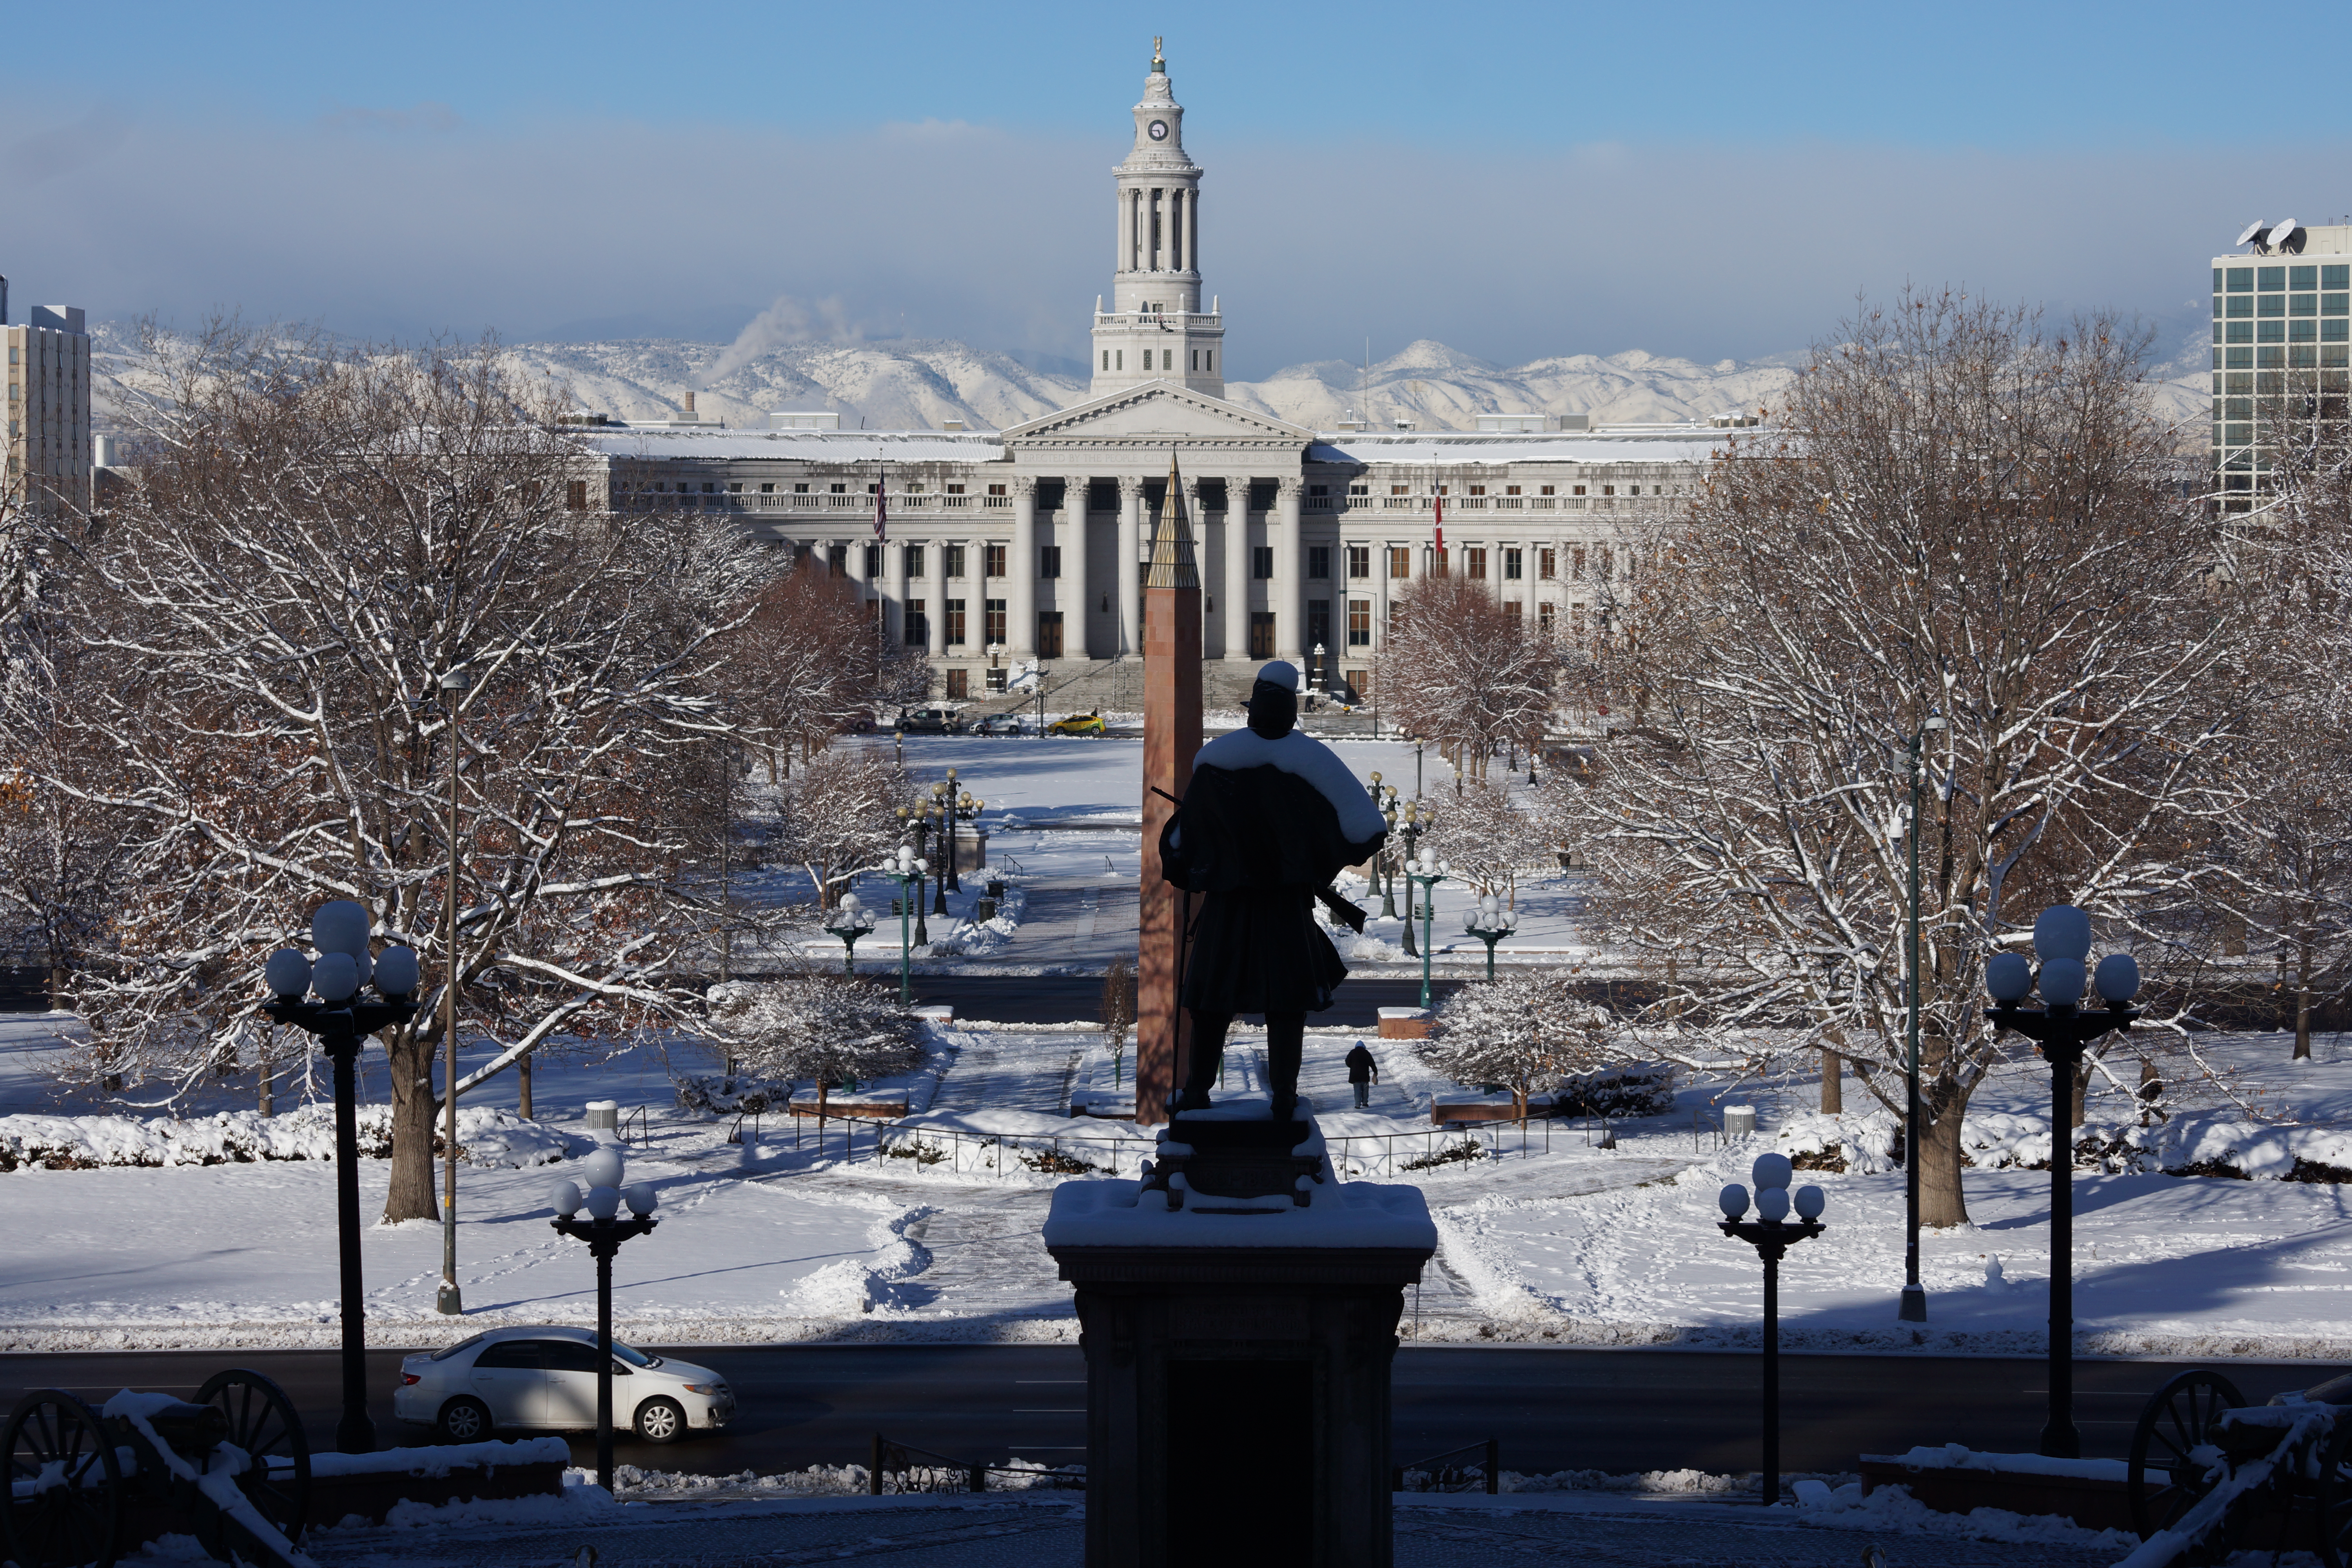 Image of Denver taken from the Colorado State Capitol